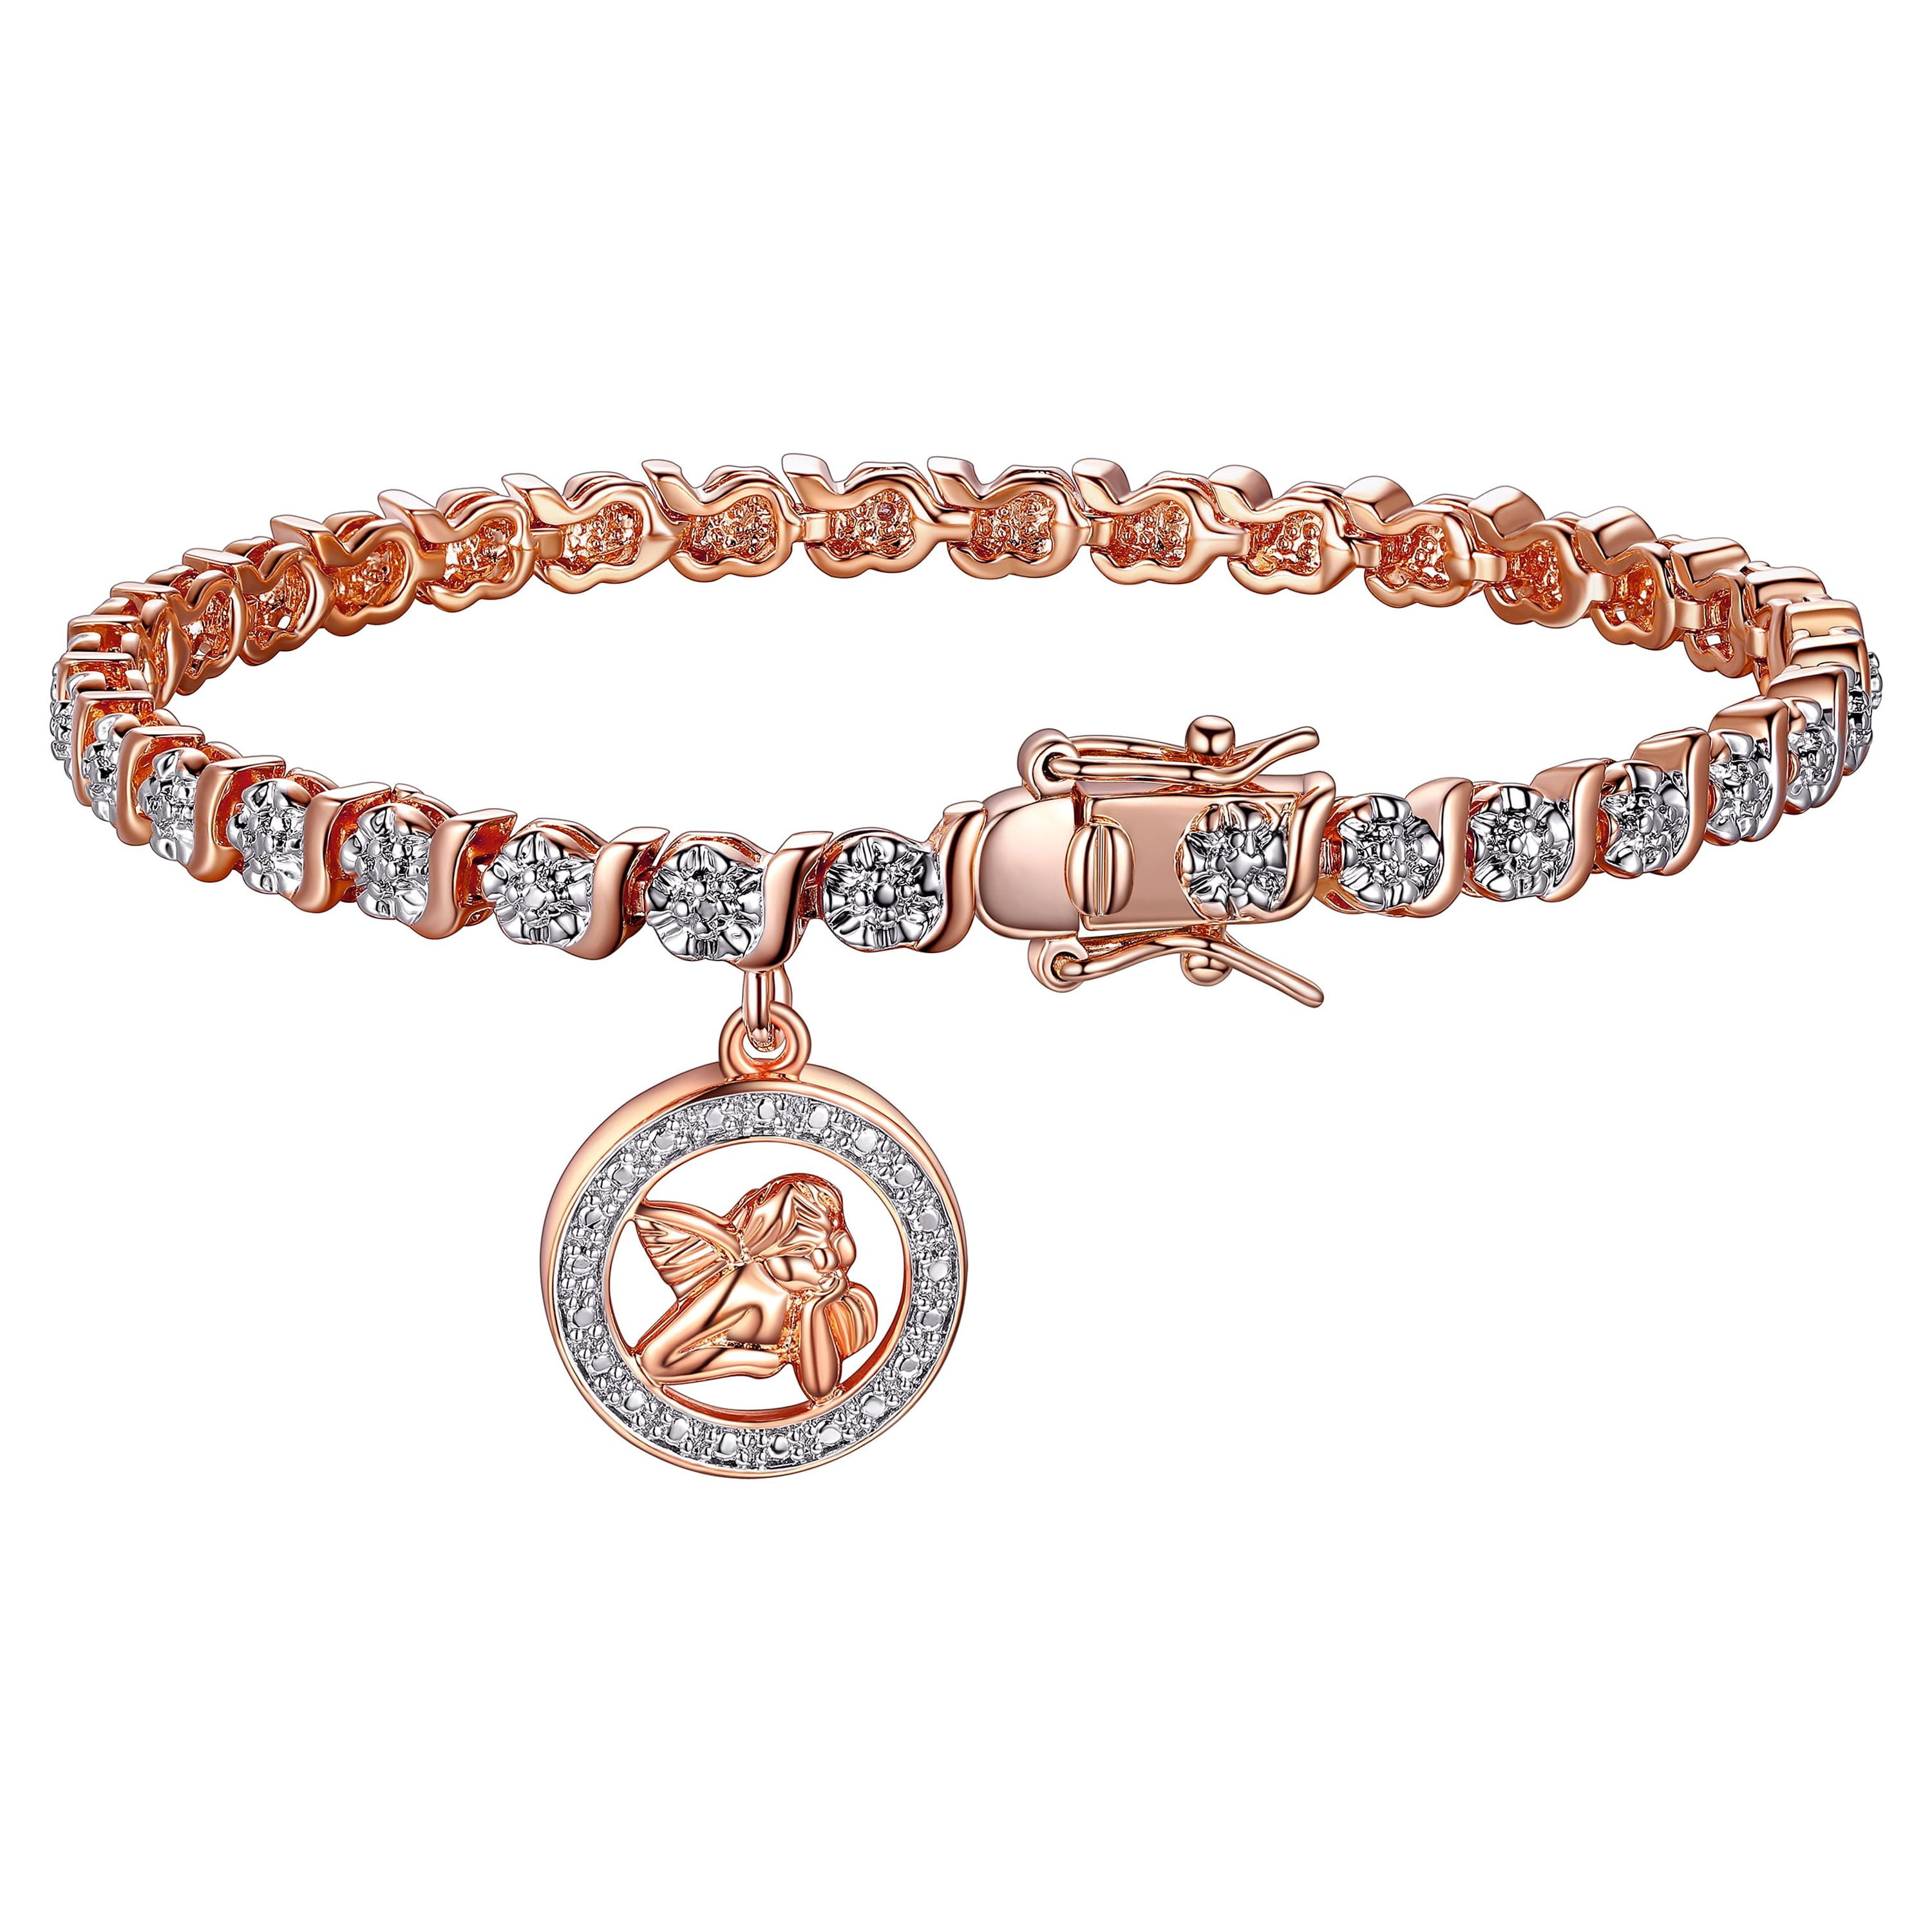 Amazon.com: Swarovski® Crystal Tennis Bracelet, 8mm Denim Blue, Blush Pink,  Silk, Assorted Finishes, Heart And Key Charms, Out-N-About, Gift Packaged :  Handmade Products